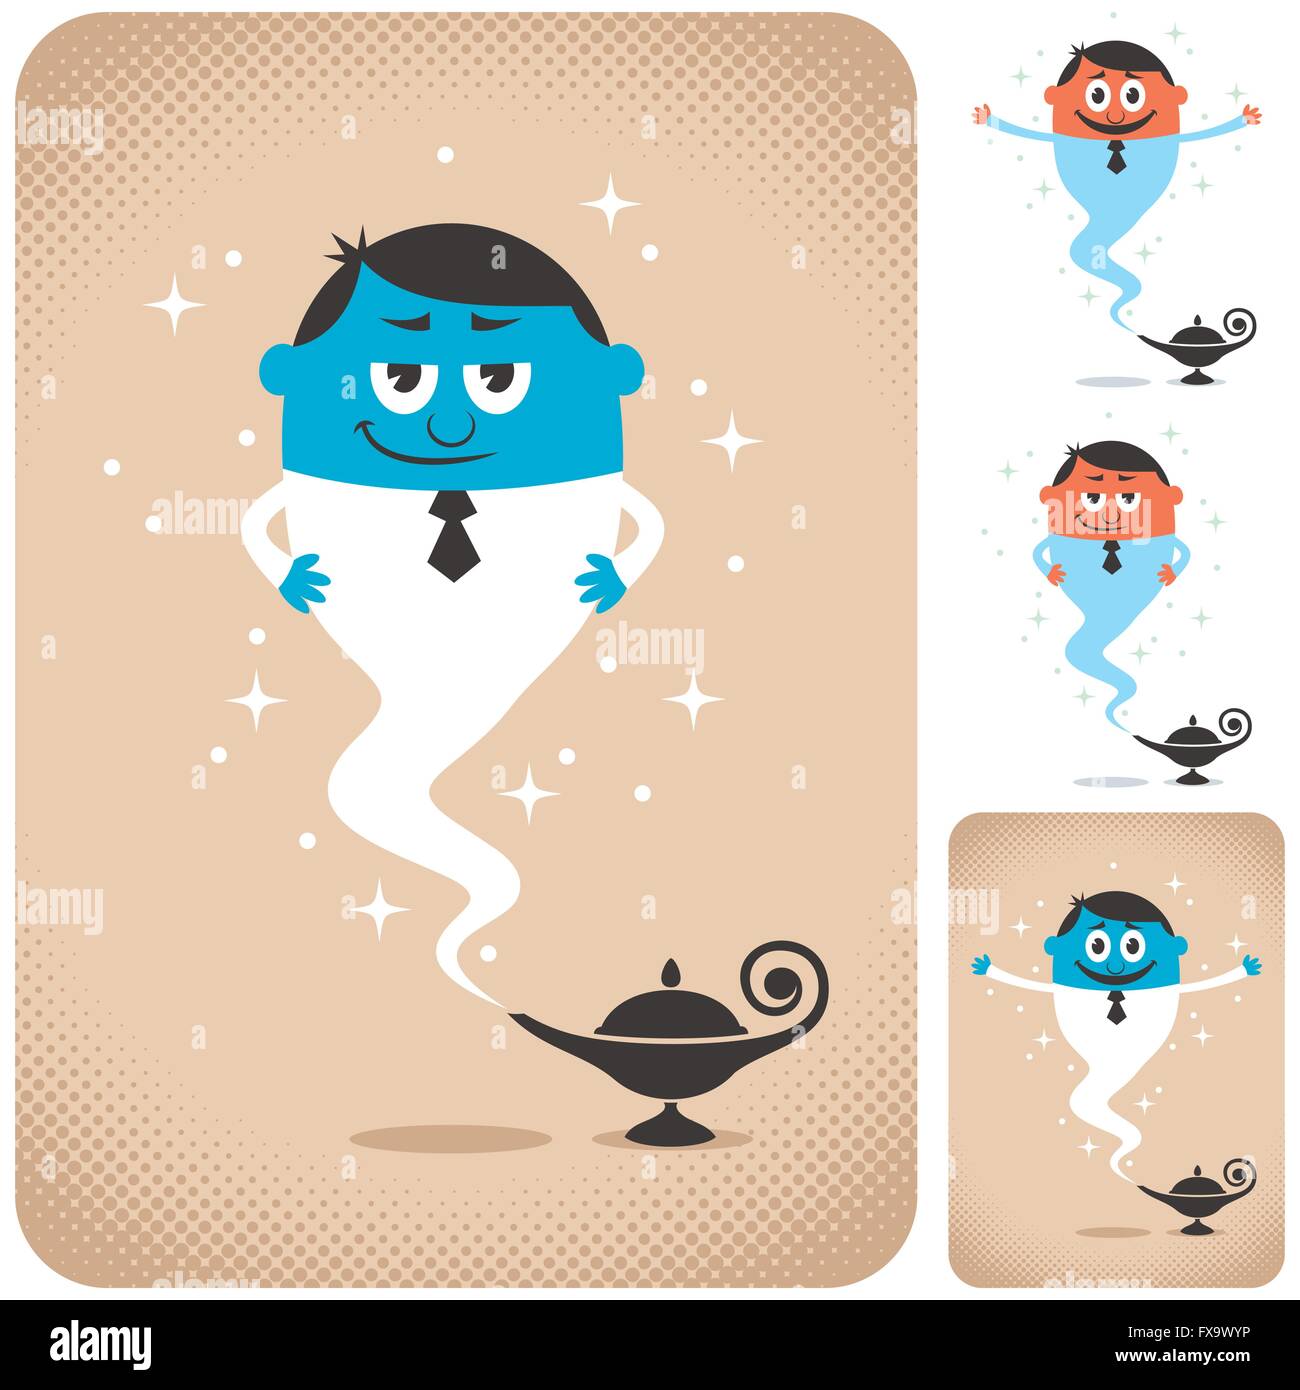 Genie coming out of magic lamp. The illustration is in 4 different versions. Stock Vector